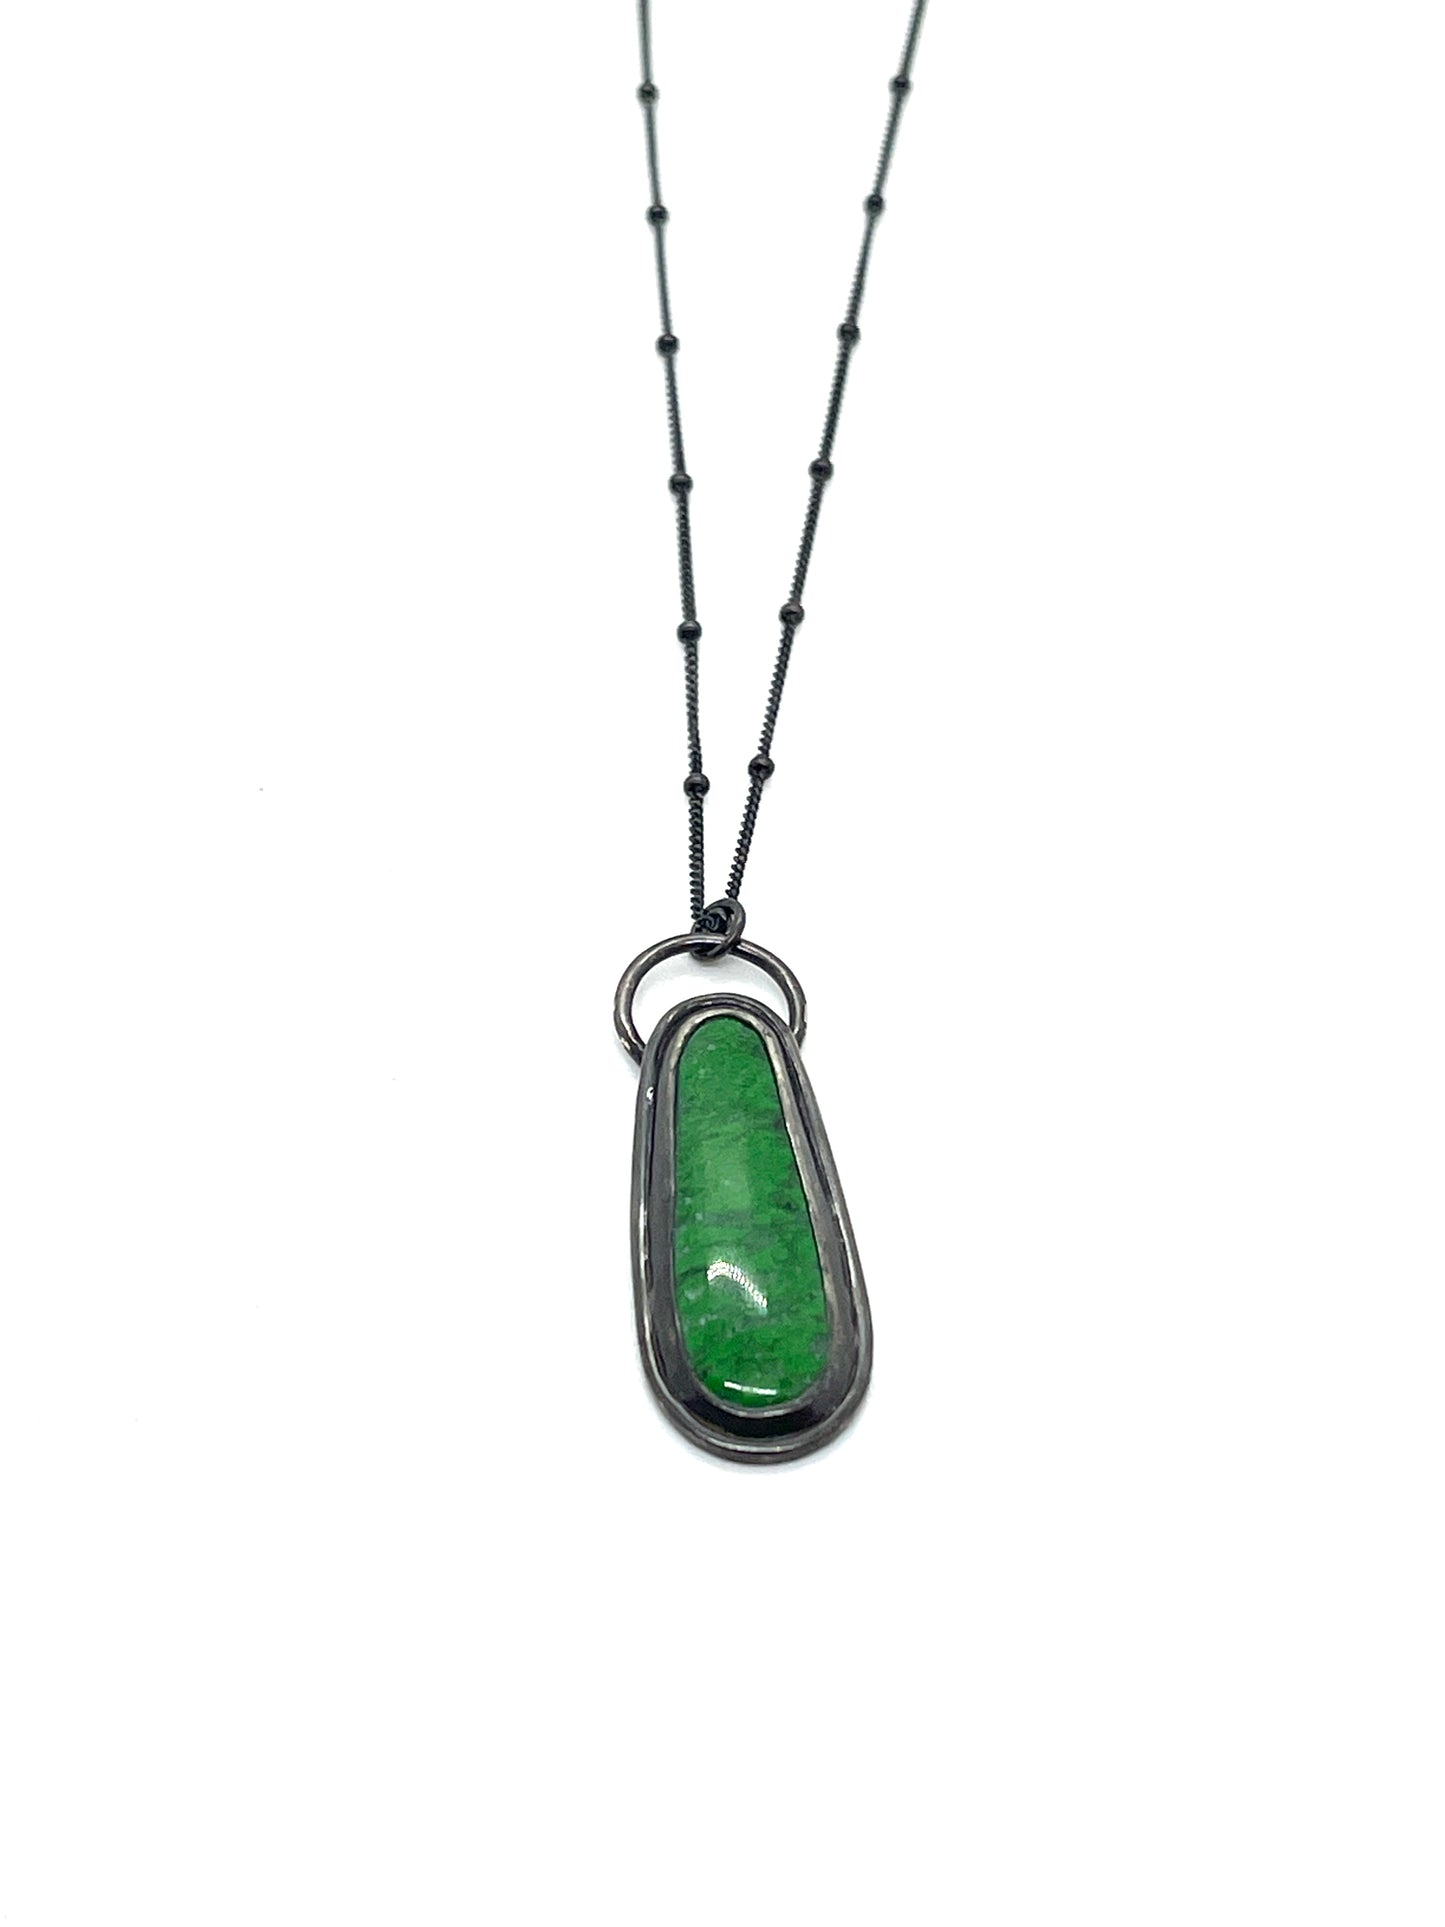 Maw sit sit (green elongated drop) and oxidized sterling silver necklace